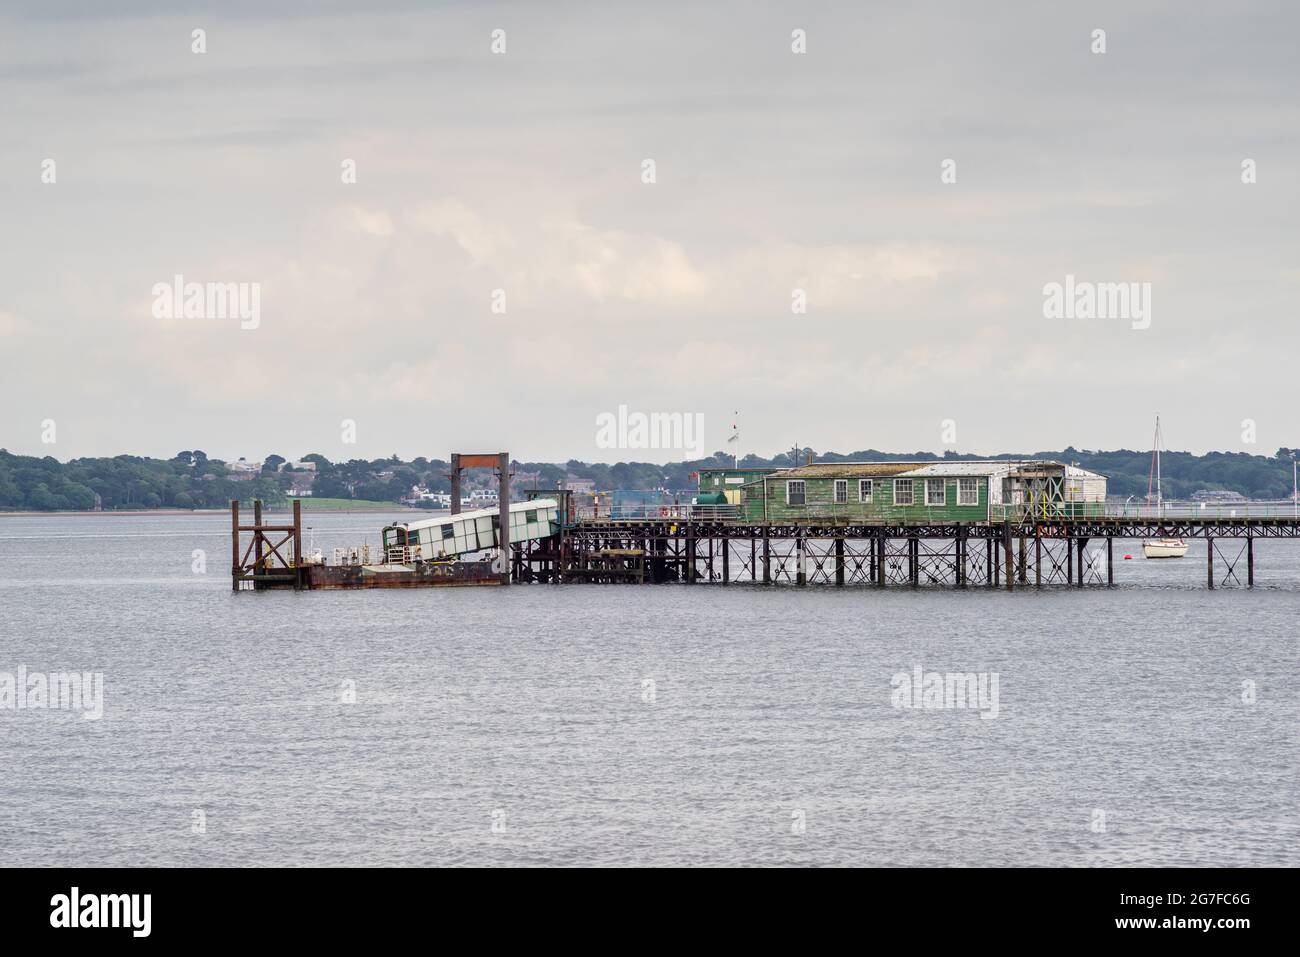 Hythe Pier Ferry Port - one of the longest piers in the UK, Hythe, Southampton, England, UK Stock Photo